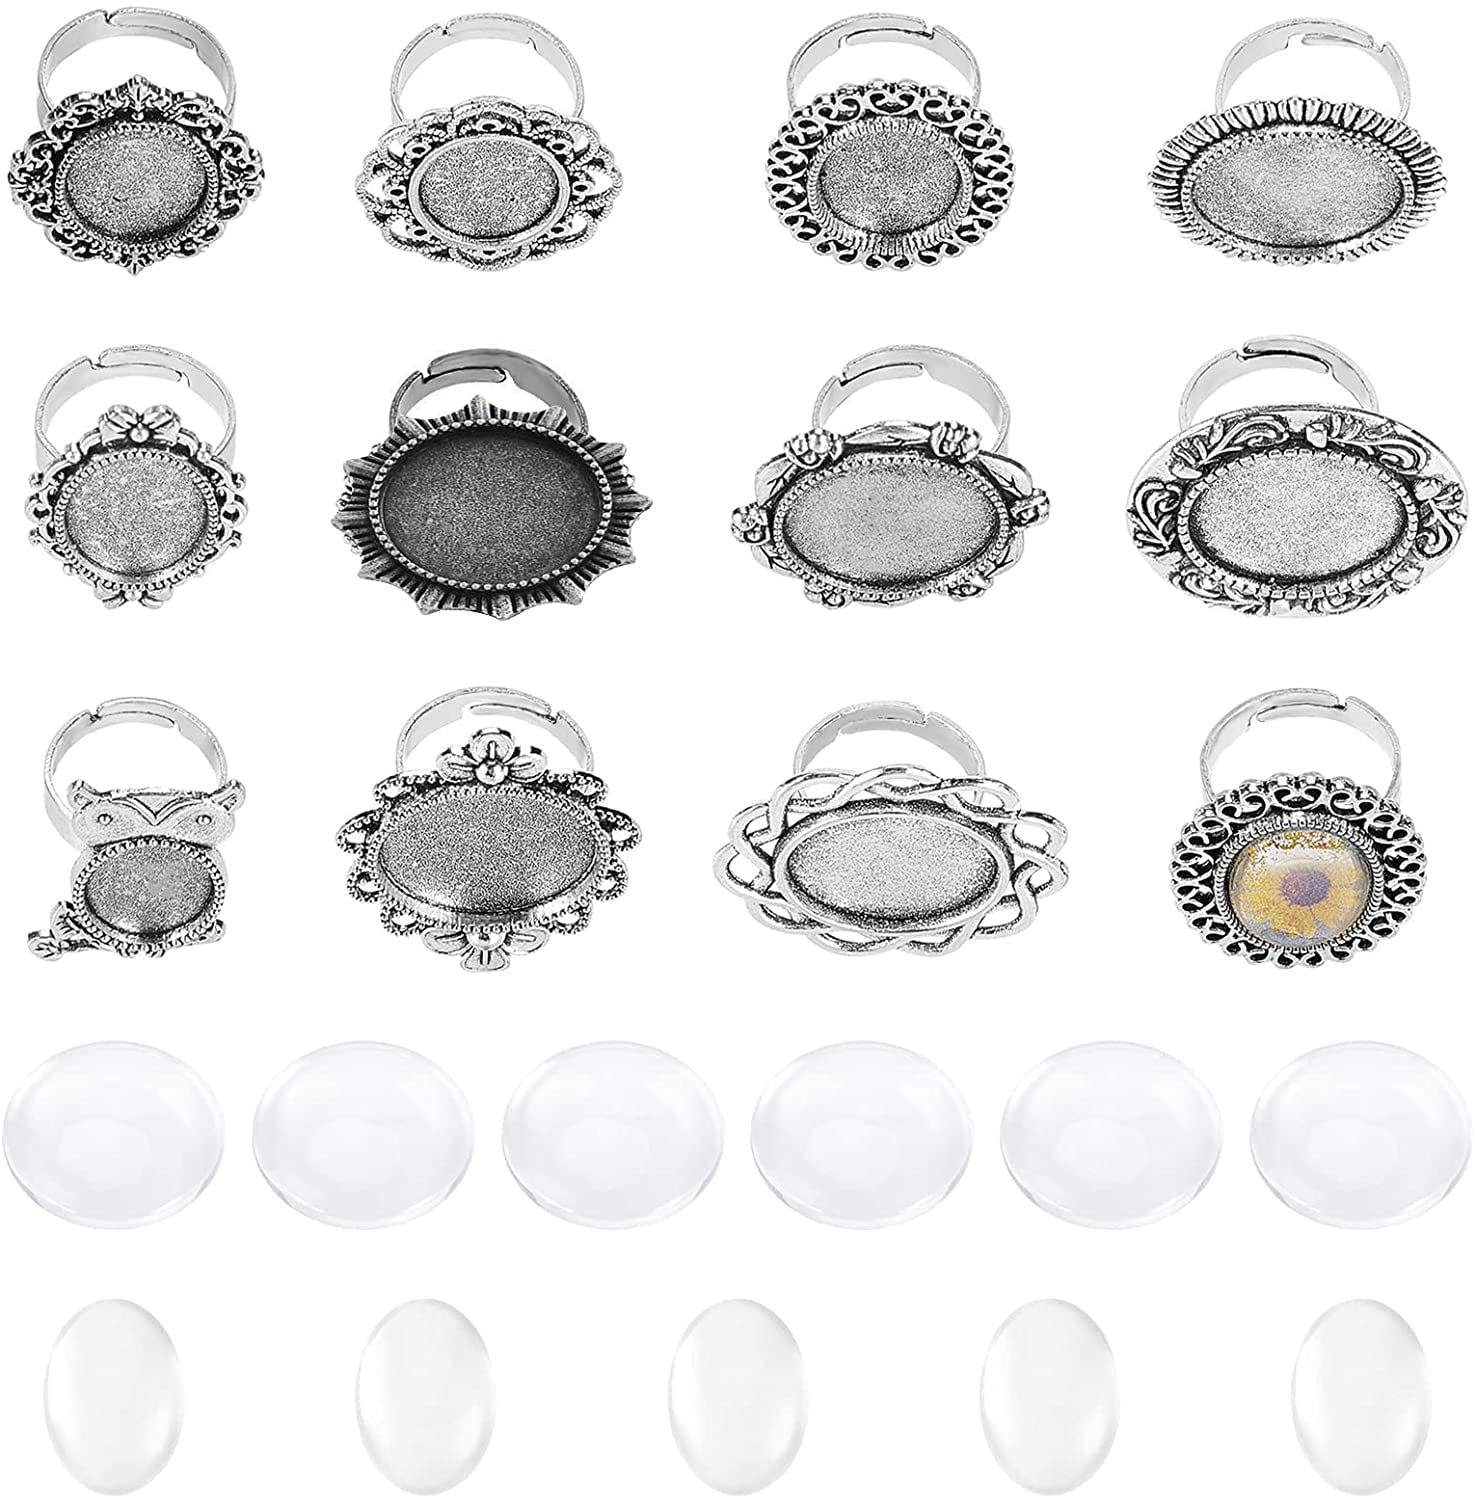 Silver Ring Base Findings / Adjustable Ring Blank with Pin (5 pcs / Si, MiniatureSweet, Kawaii Resin Crafts, Decoden Cabochons Supplies